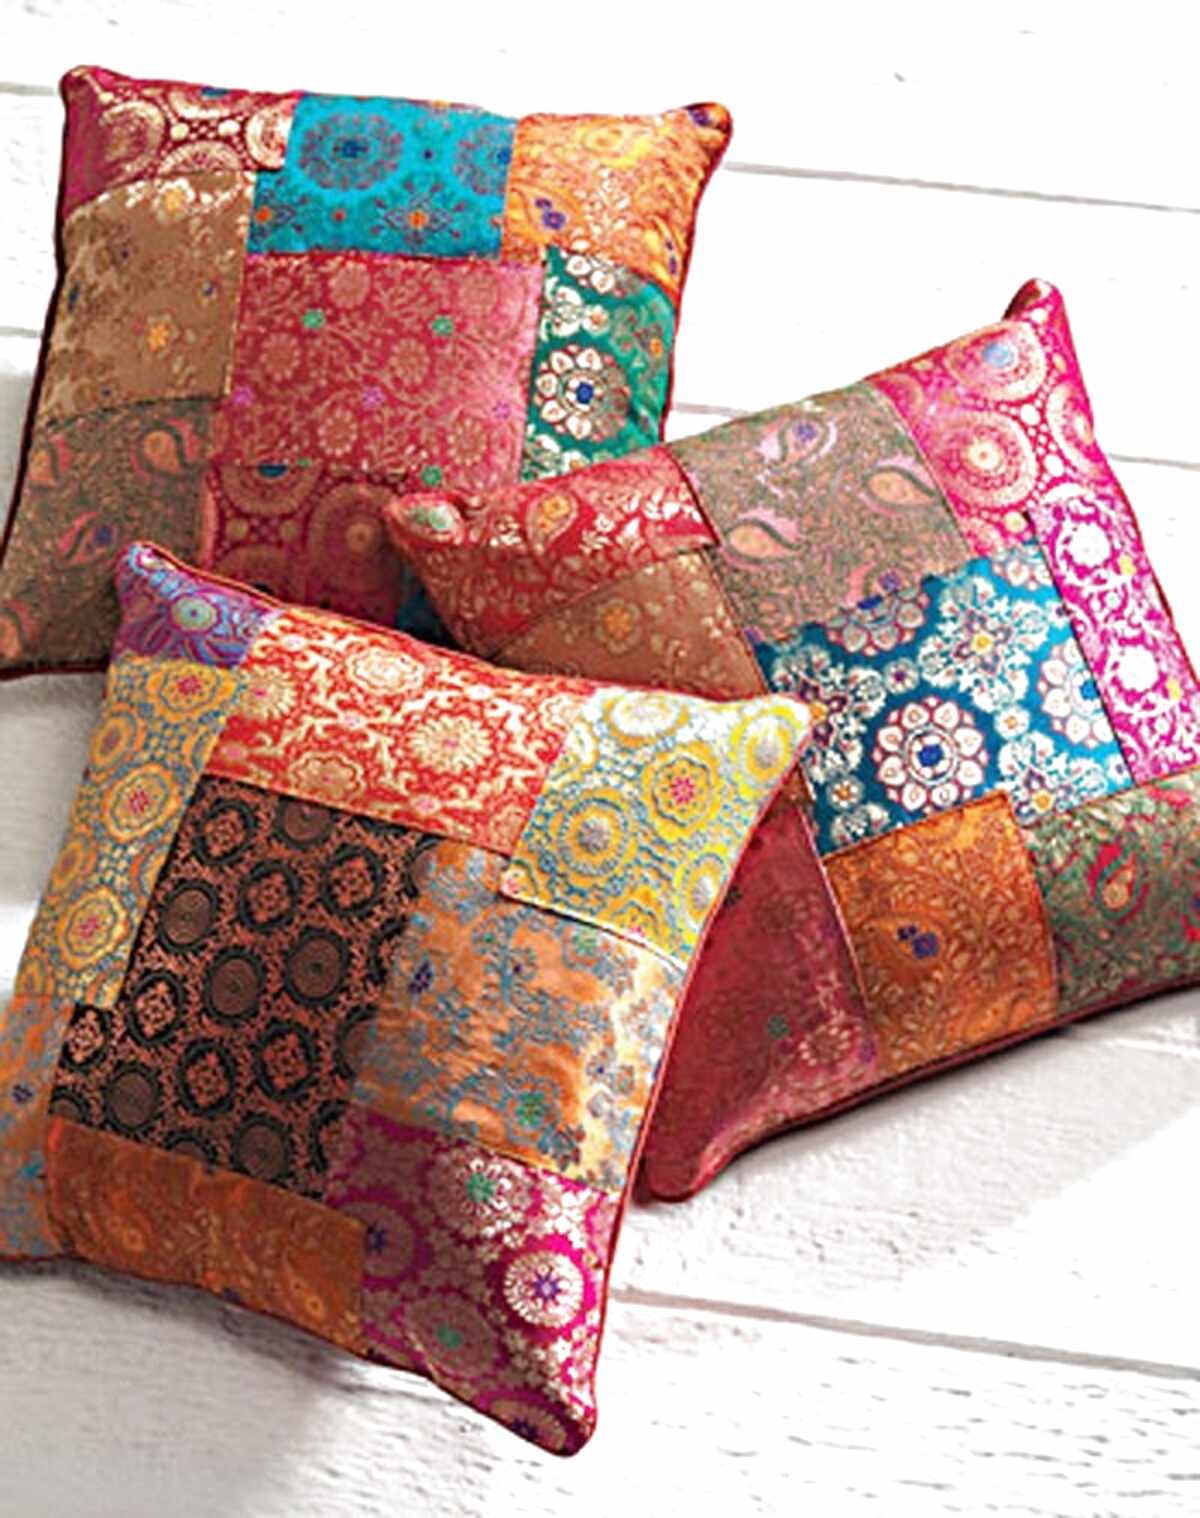 CC98 Brocade Multi Coloured Patchwork Cushion Cover C2y2 Ip Multi%2Bcoloured%2Bcushion%2Bcovers 